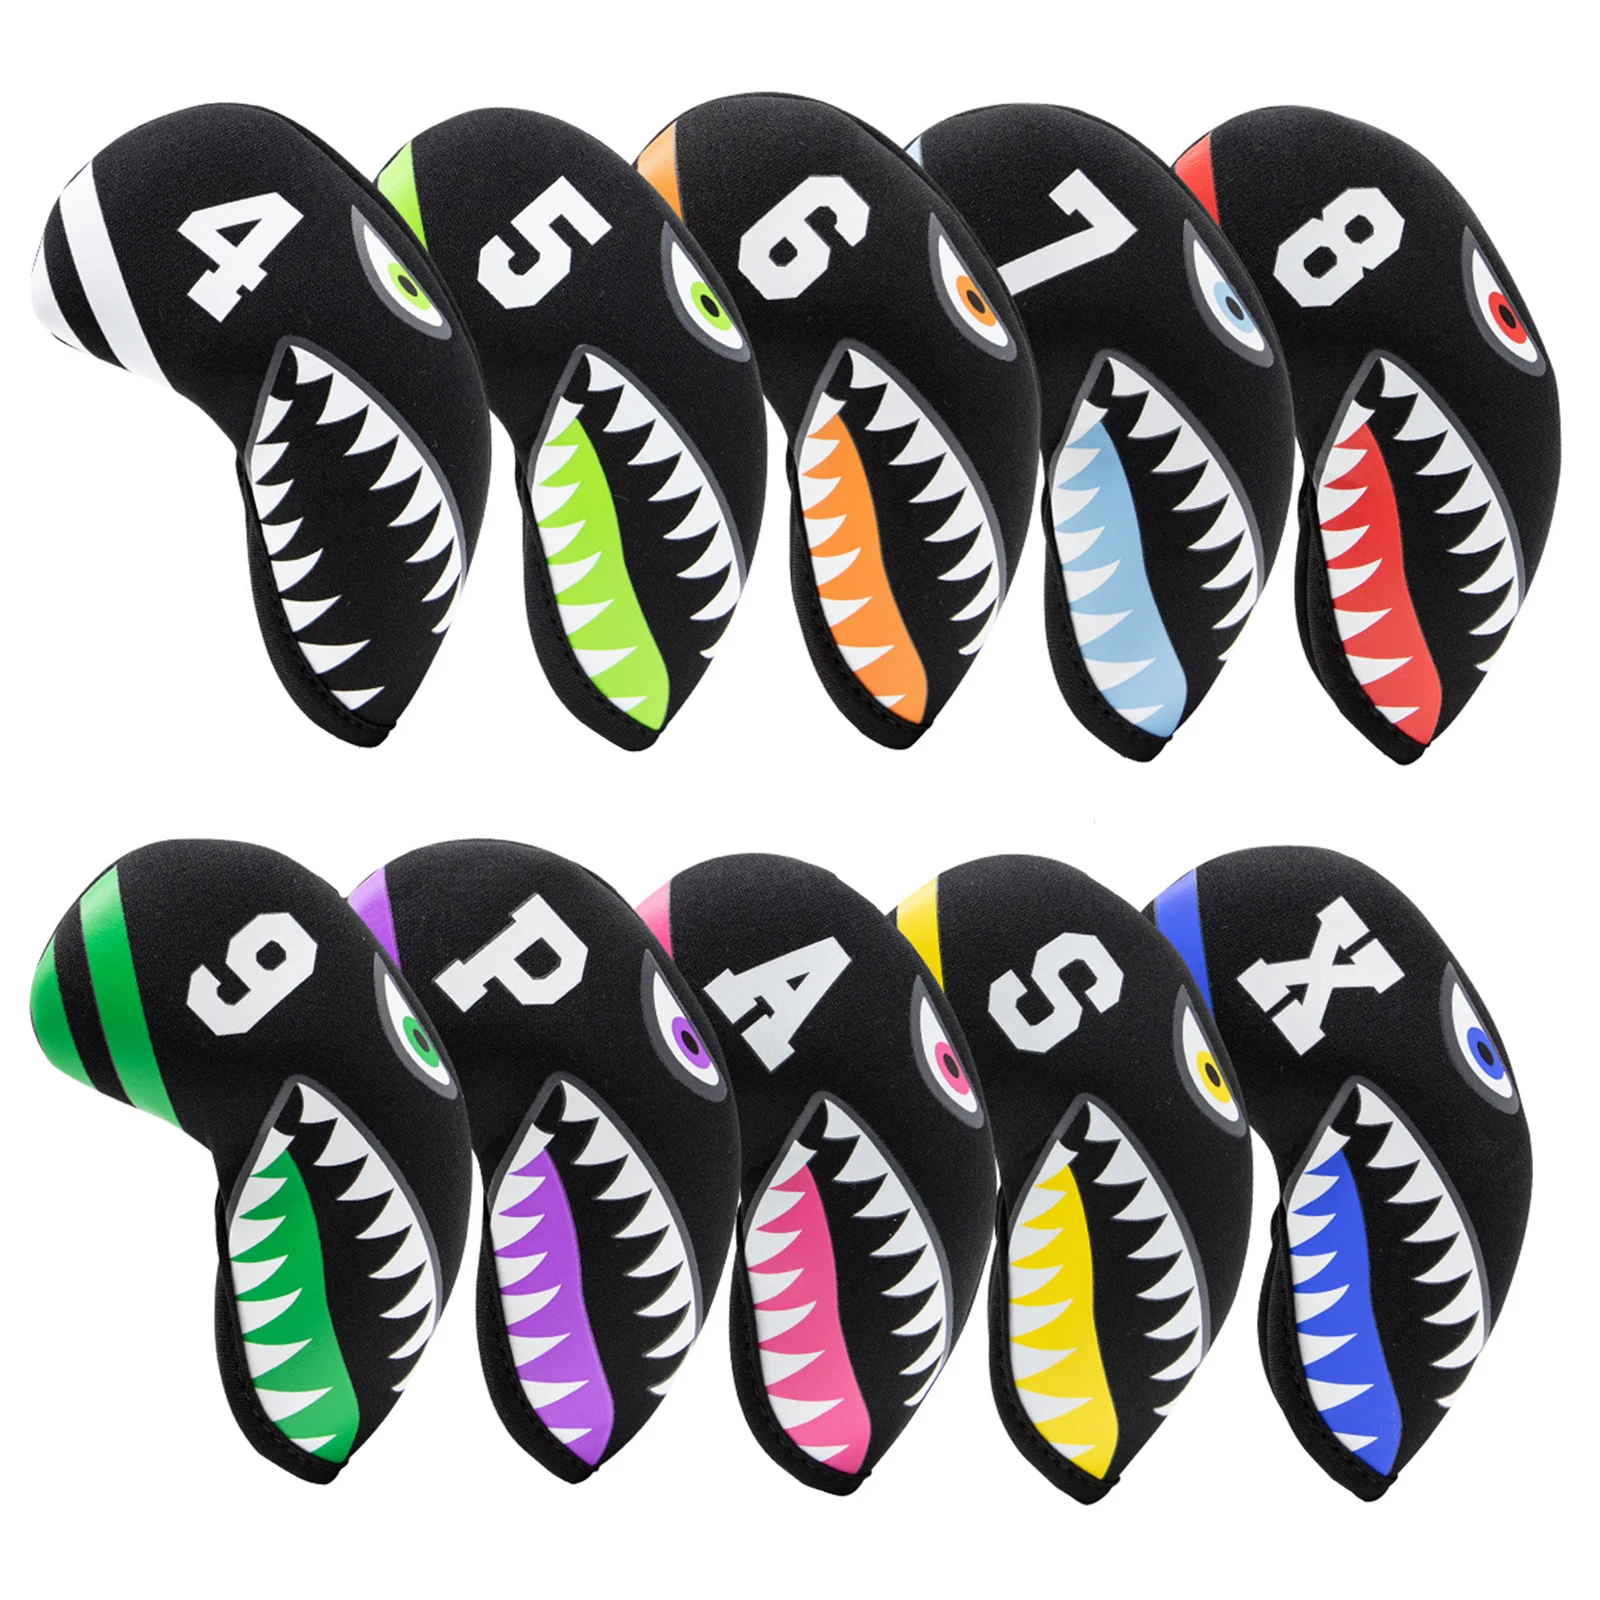 

10pcs/Set Waterproof Golf Iron Head Cover Numbered Anti-slip Club Headcover Wedges Anti-Scratch Covers Transport Clubs Protector